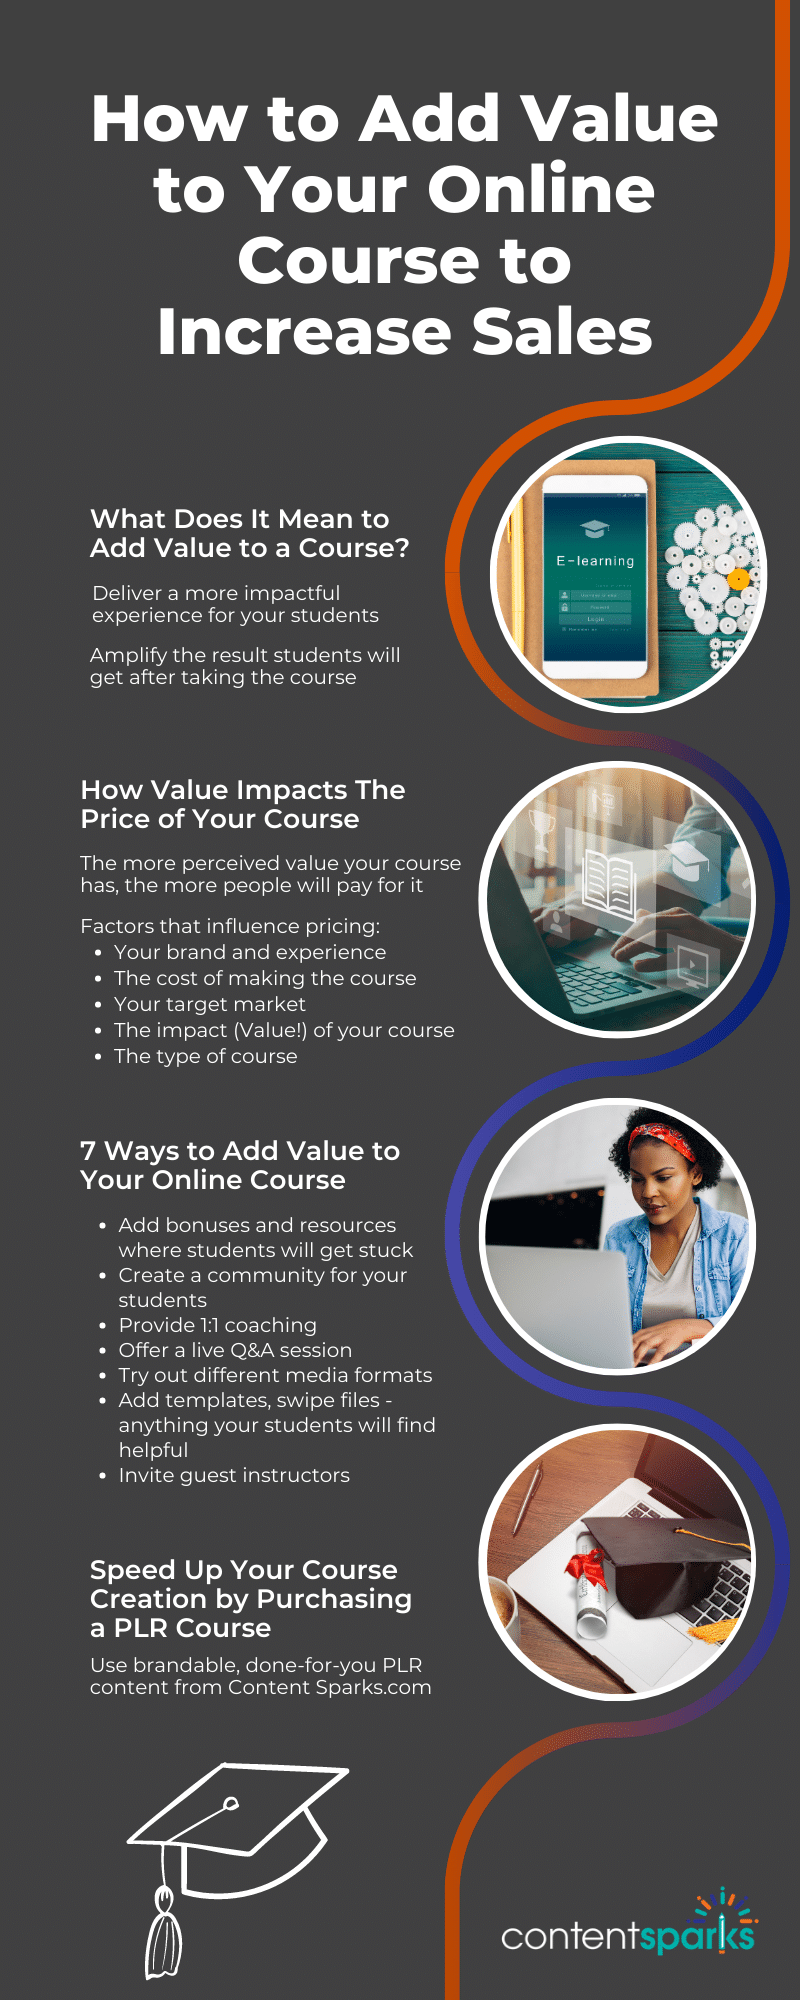 Add Value to Online Course - Infographic